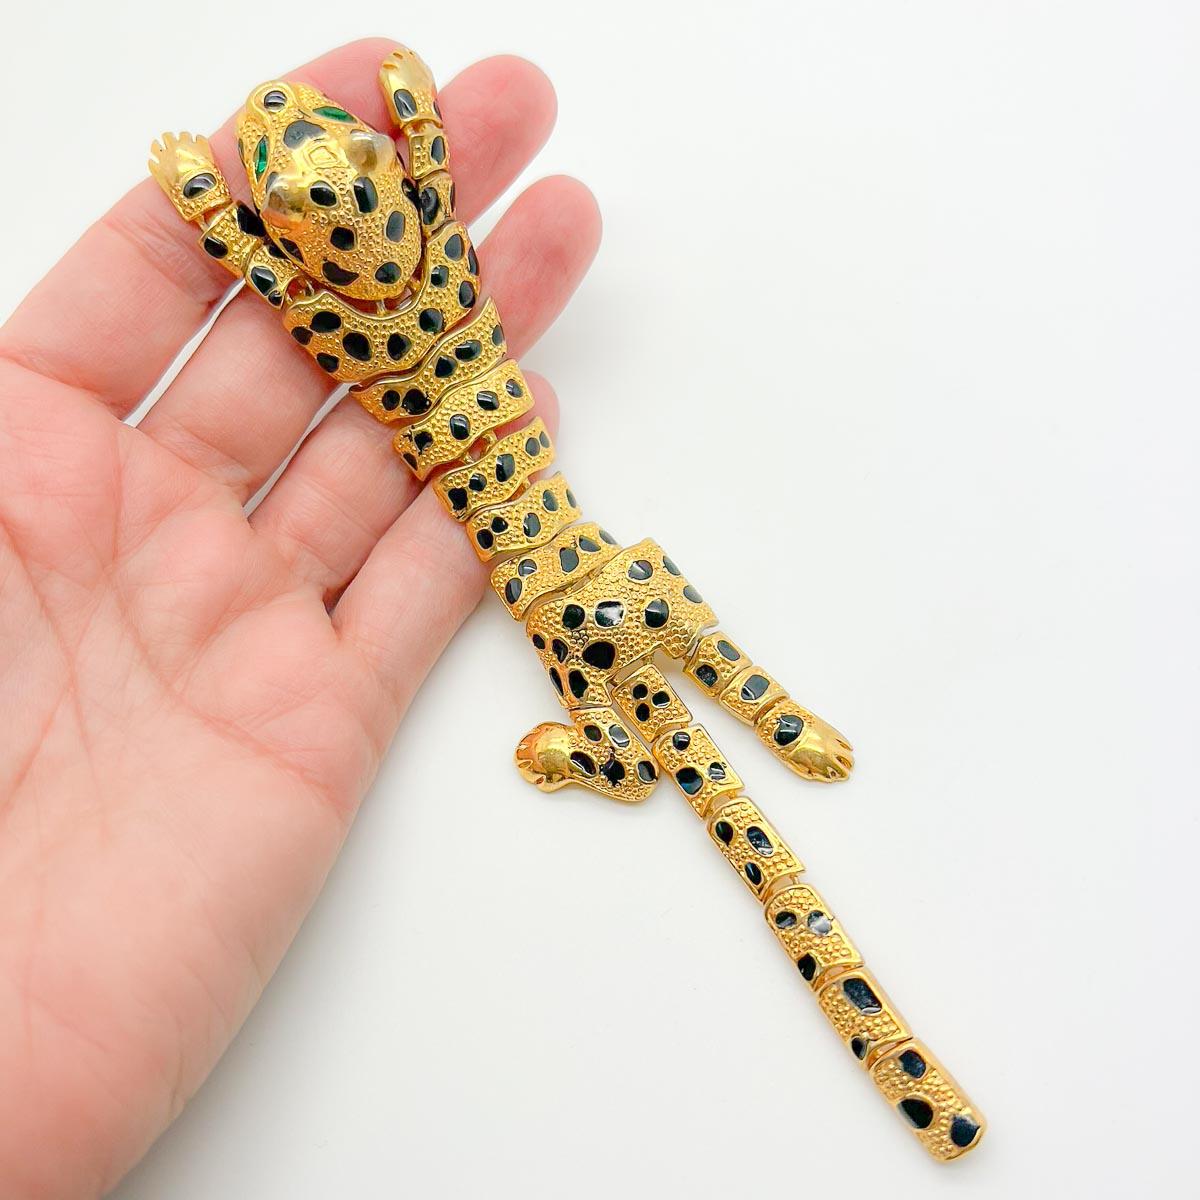 A Vintage Statement Leopard Brooch. Adorn your shoulder with this wonderfully long and dramatic big cat pin.
An unsigned beauty. A rare treasure. Just because a jewel doesn’t carry a designer name, doesn’t mean it isn't coveted. The unsigned